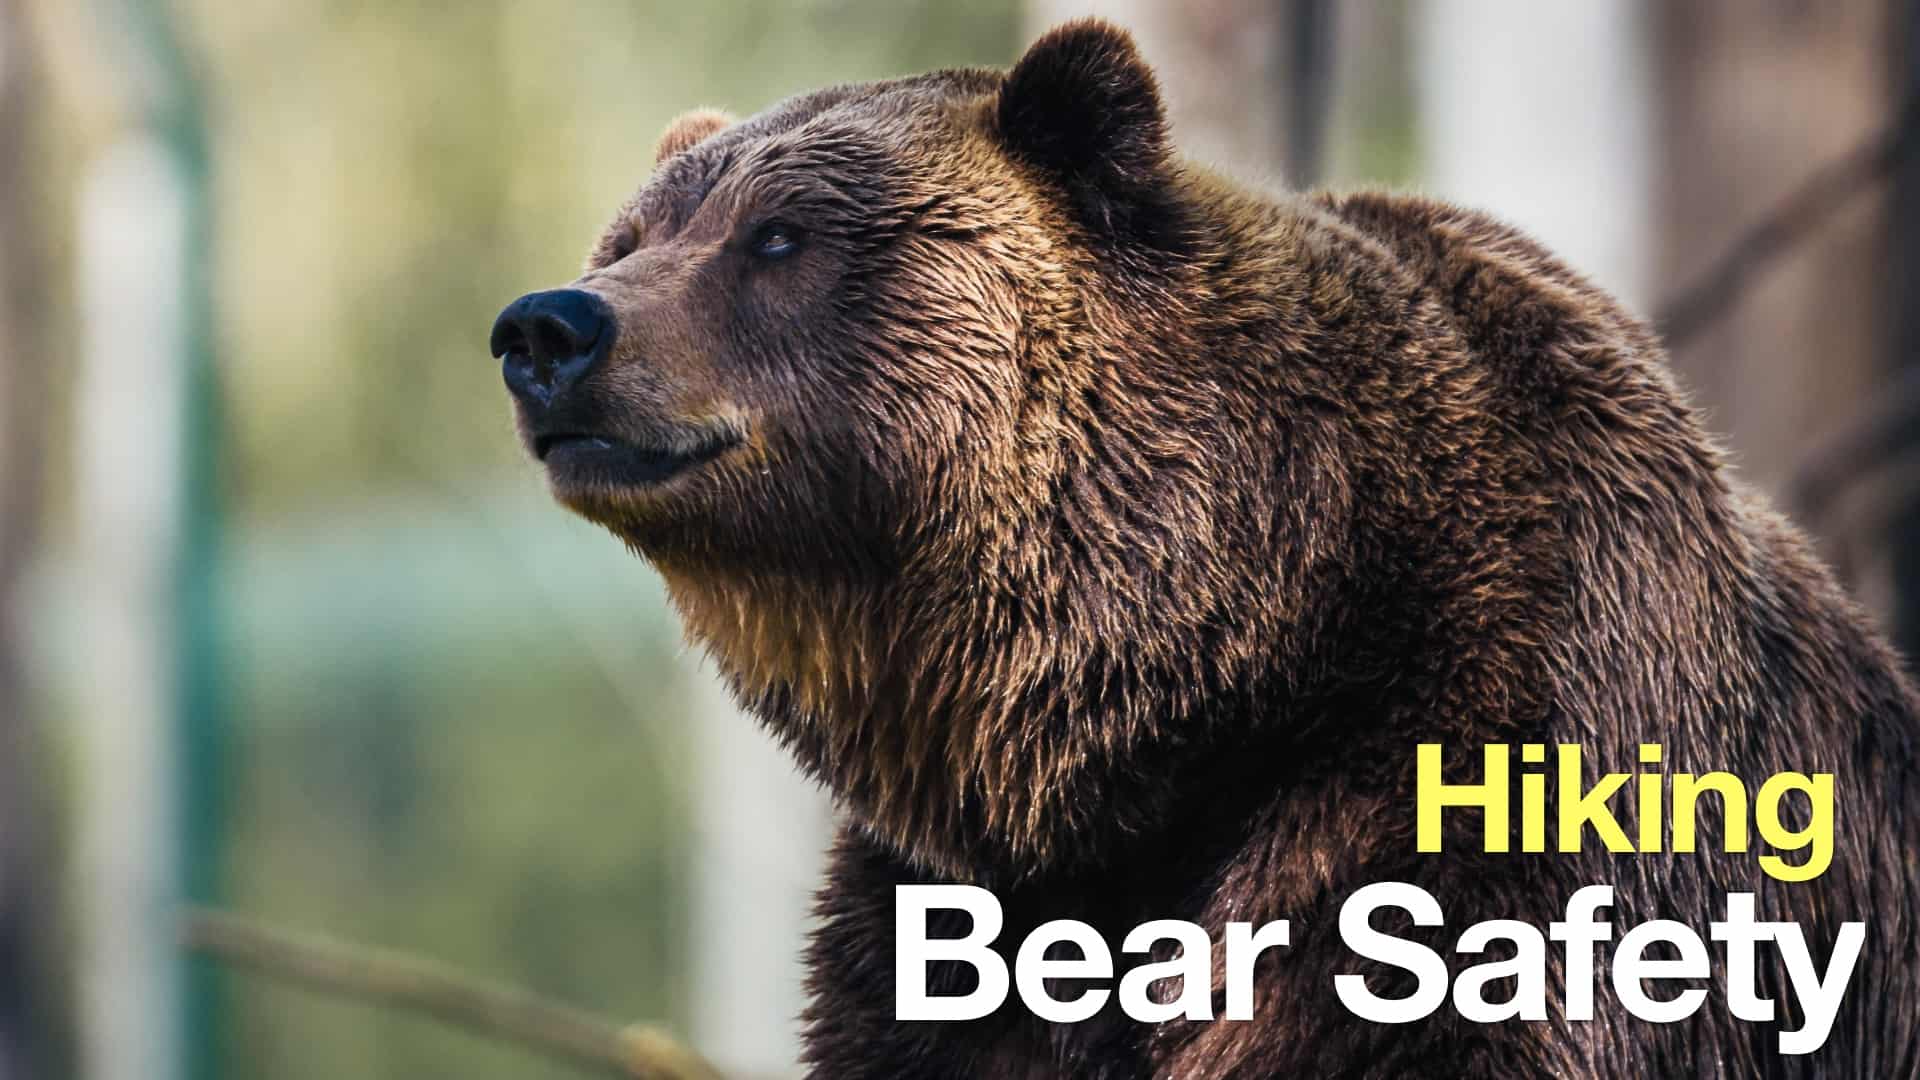 Hey Bay Staters, it's time to talk bear safety